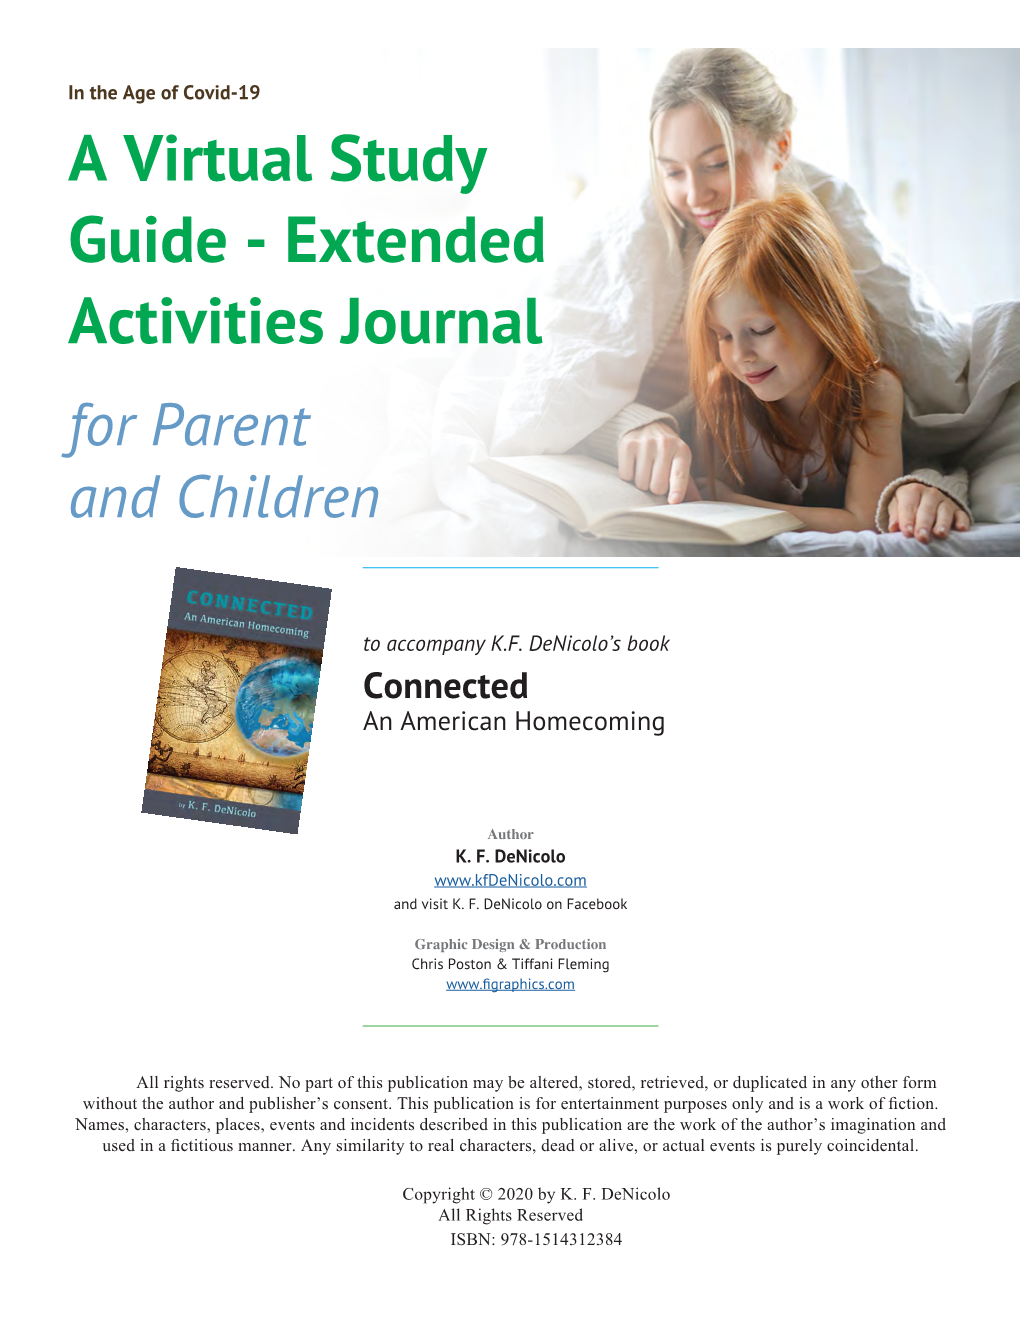 A Virtual Study Guide - Extended Activities Journal for Parent and Children